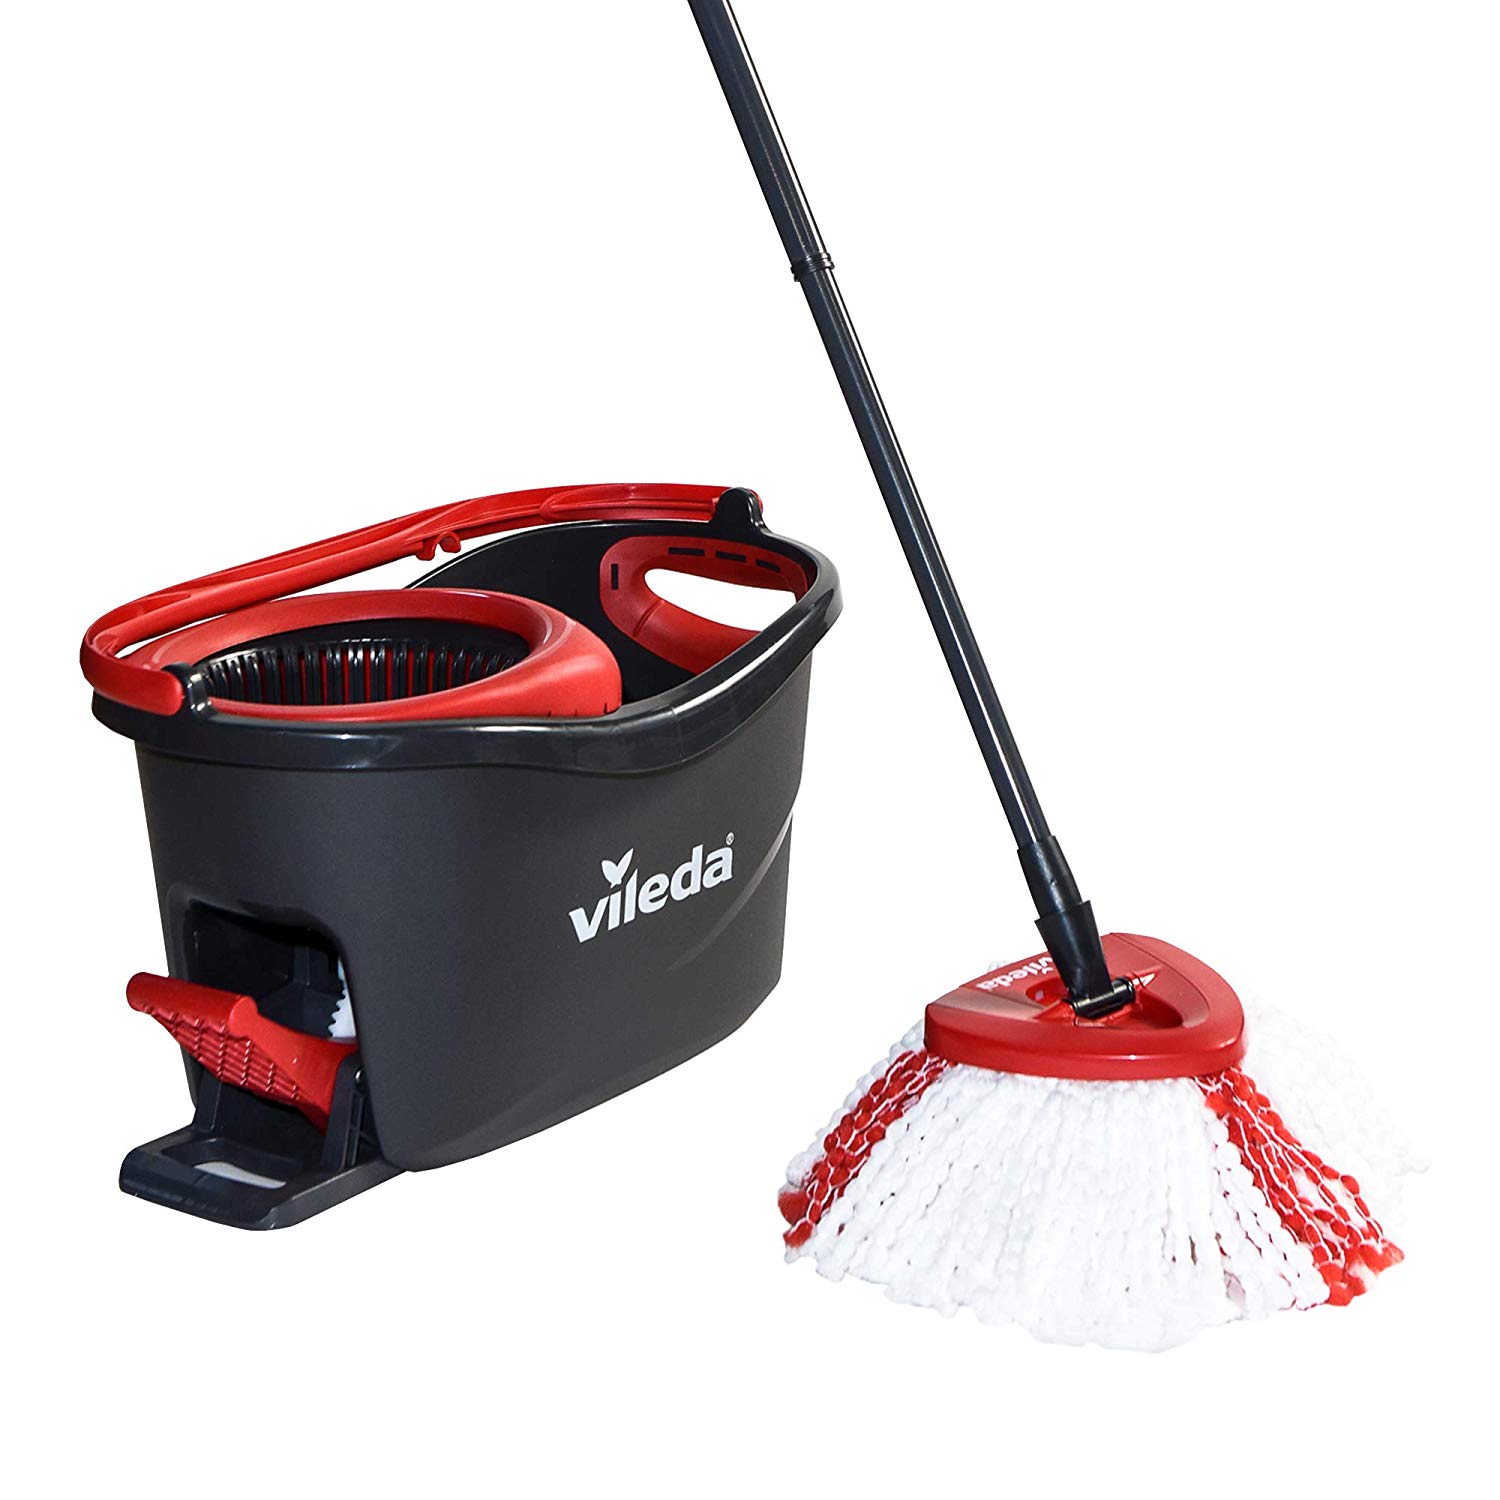 Spring Cleaning Made Easy With Vileda EasyWring – Feisty Frugal